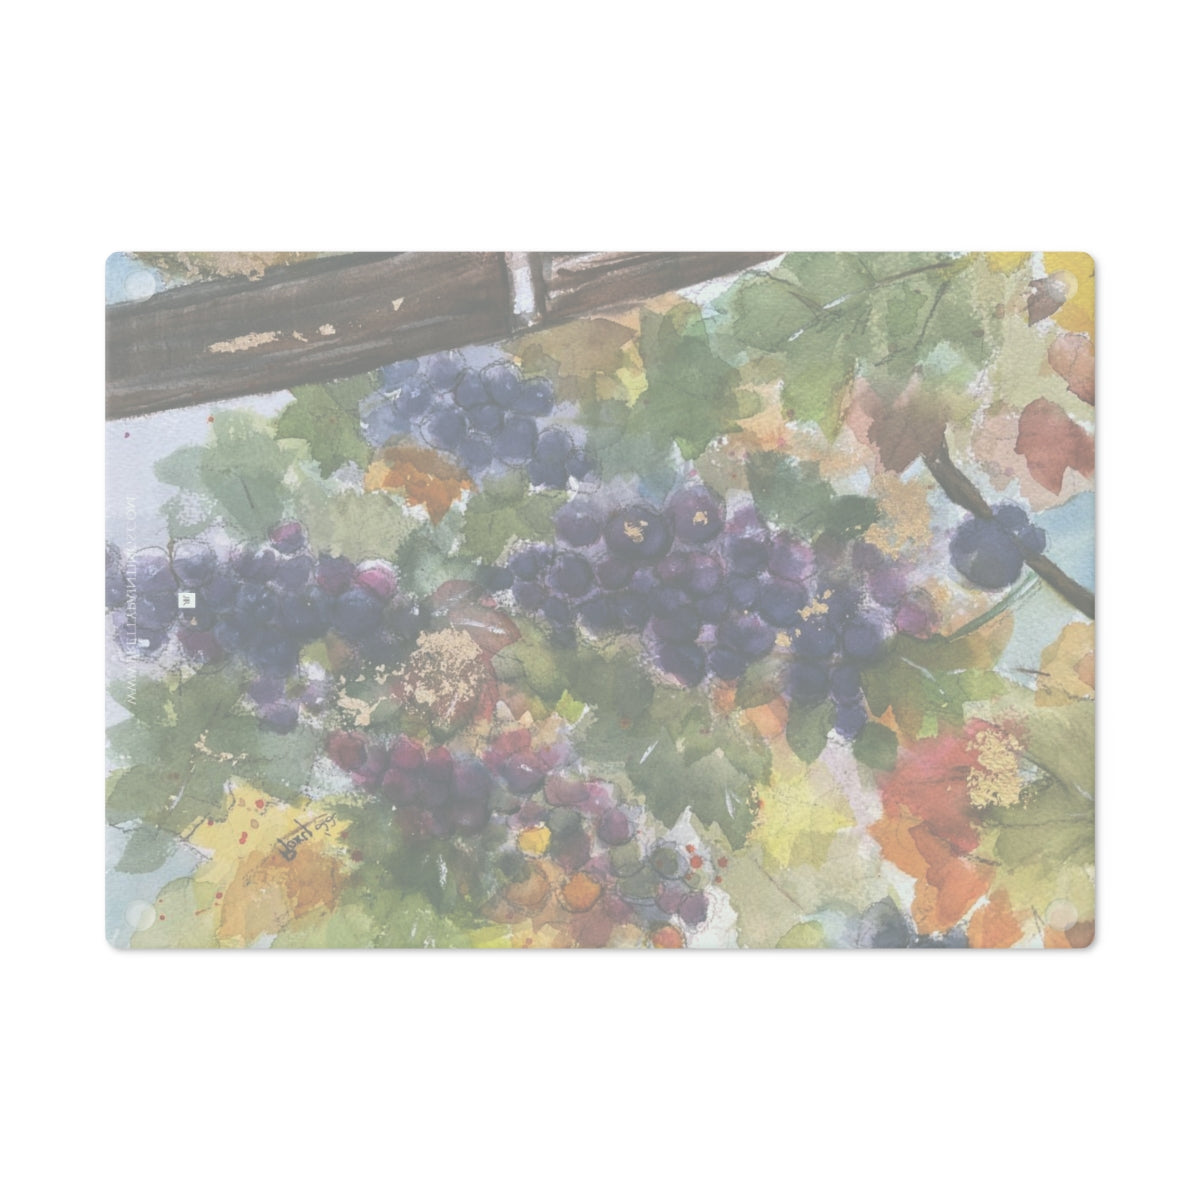 Plump Grapes on the Vine Glass Cutting Board